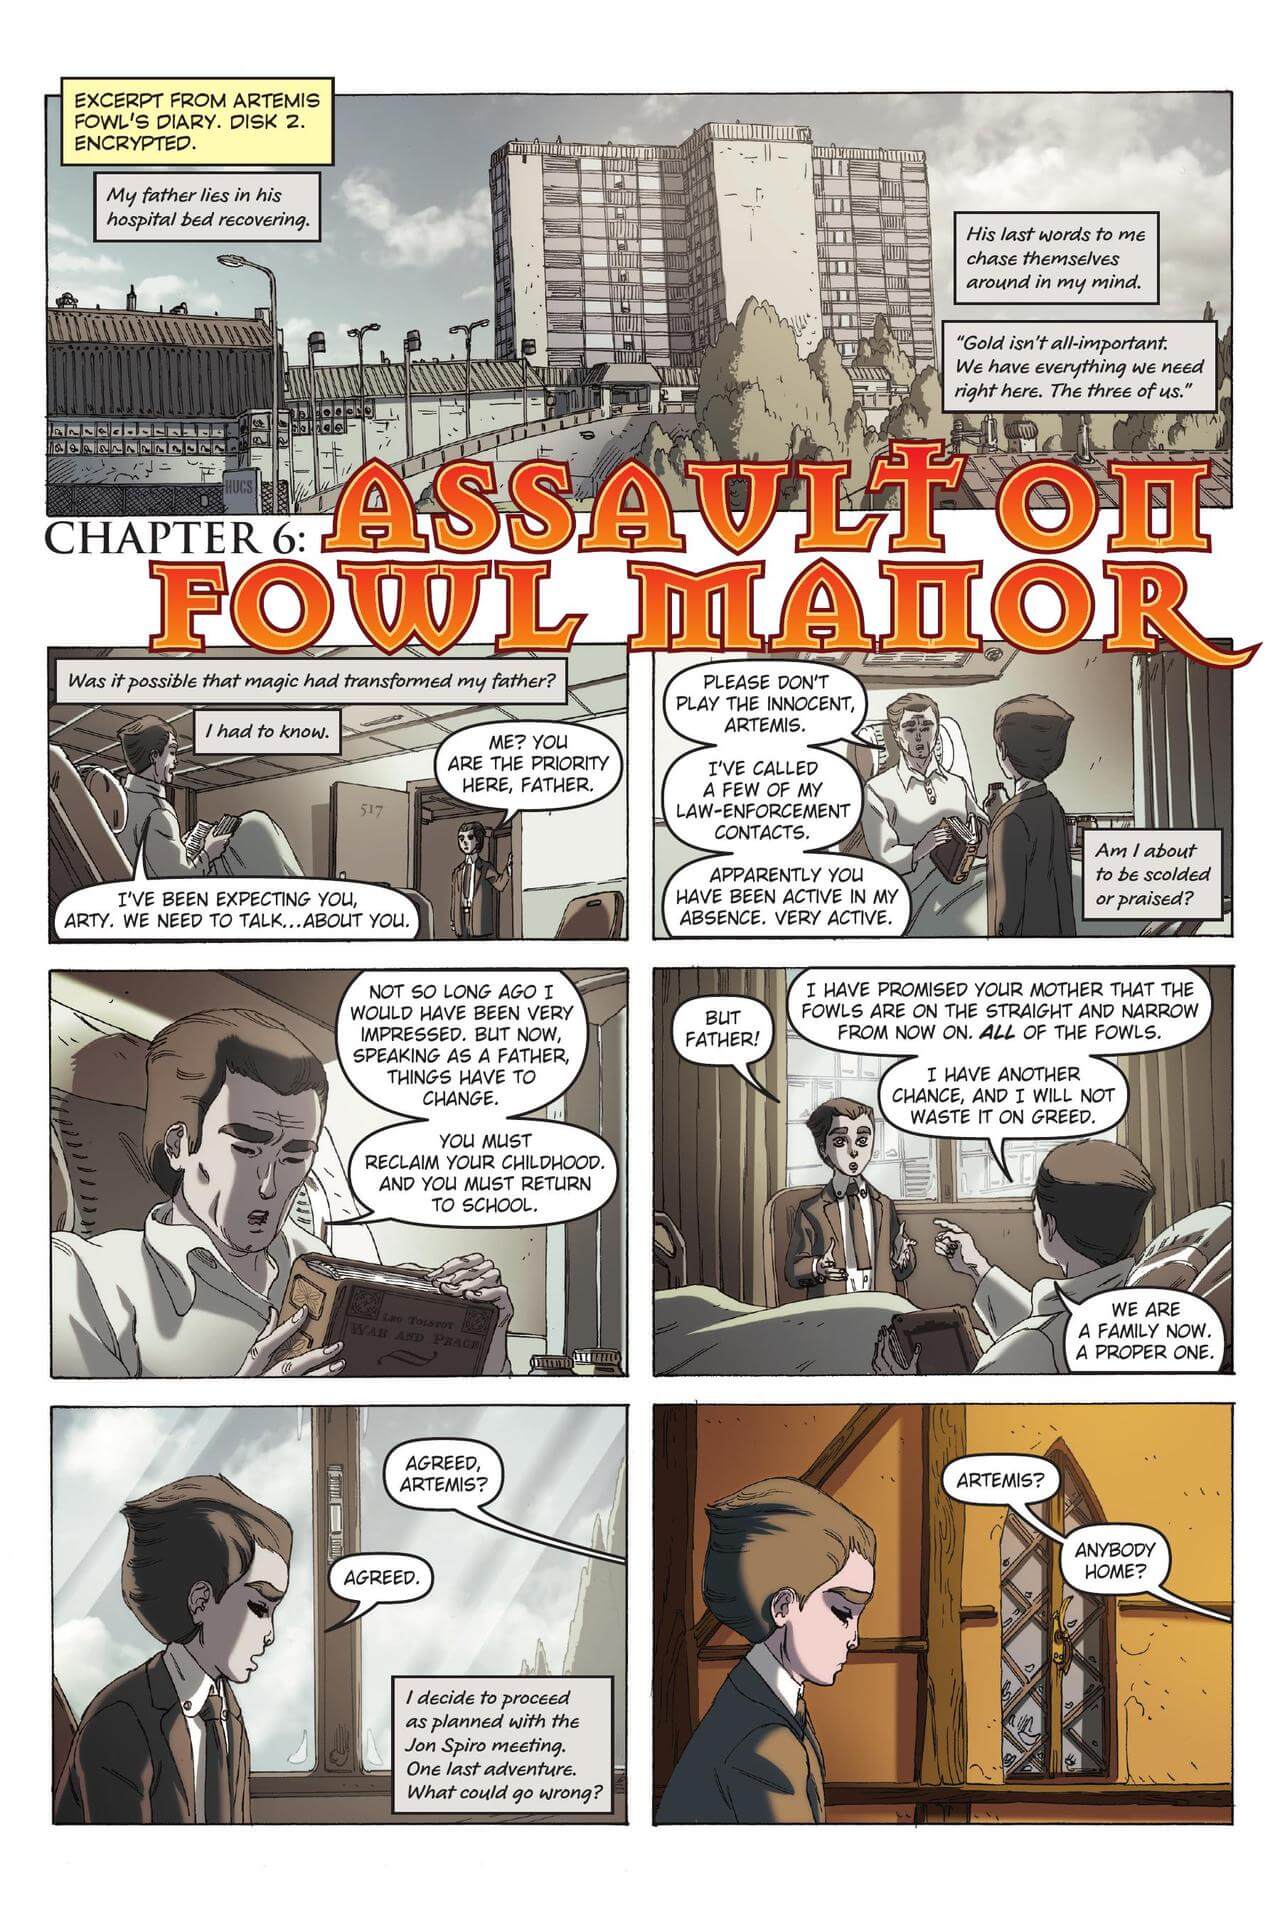 page 53 of artemis fowl eternity code graphic novel